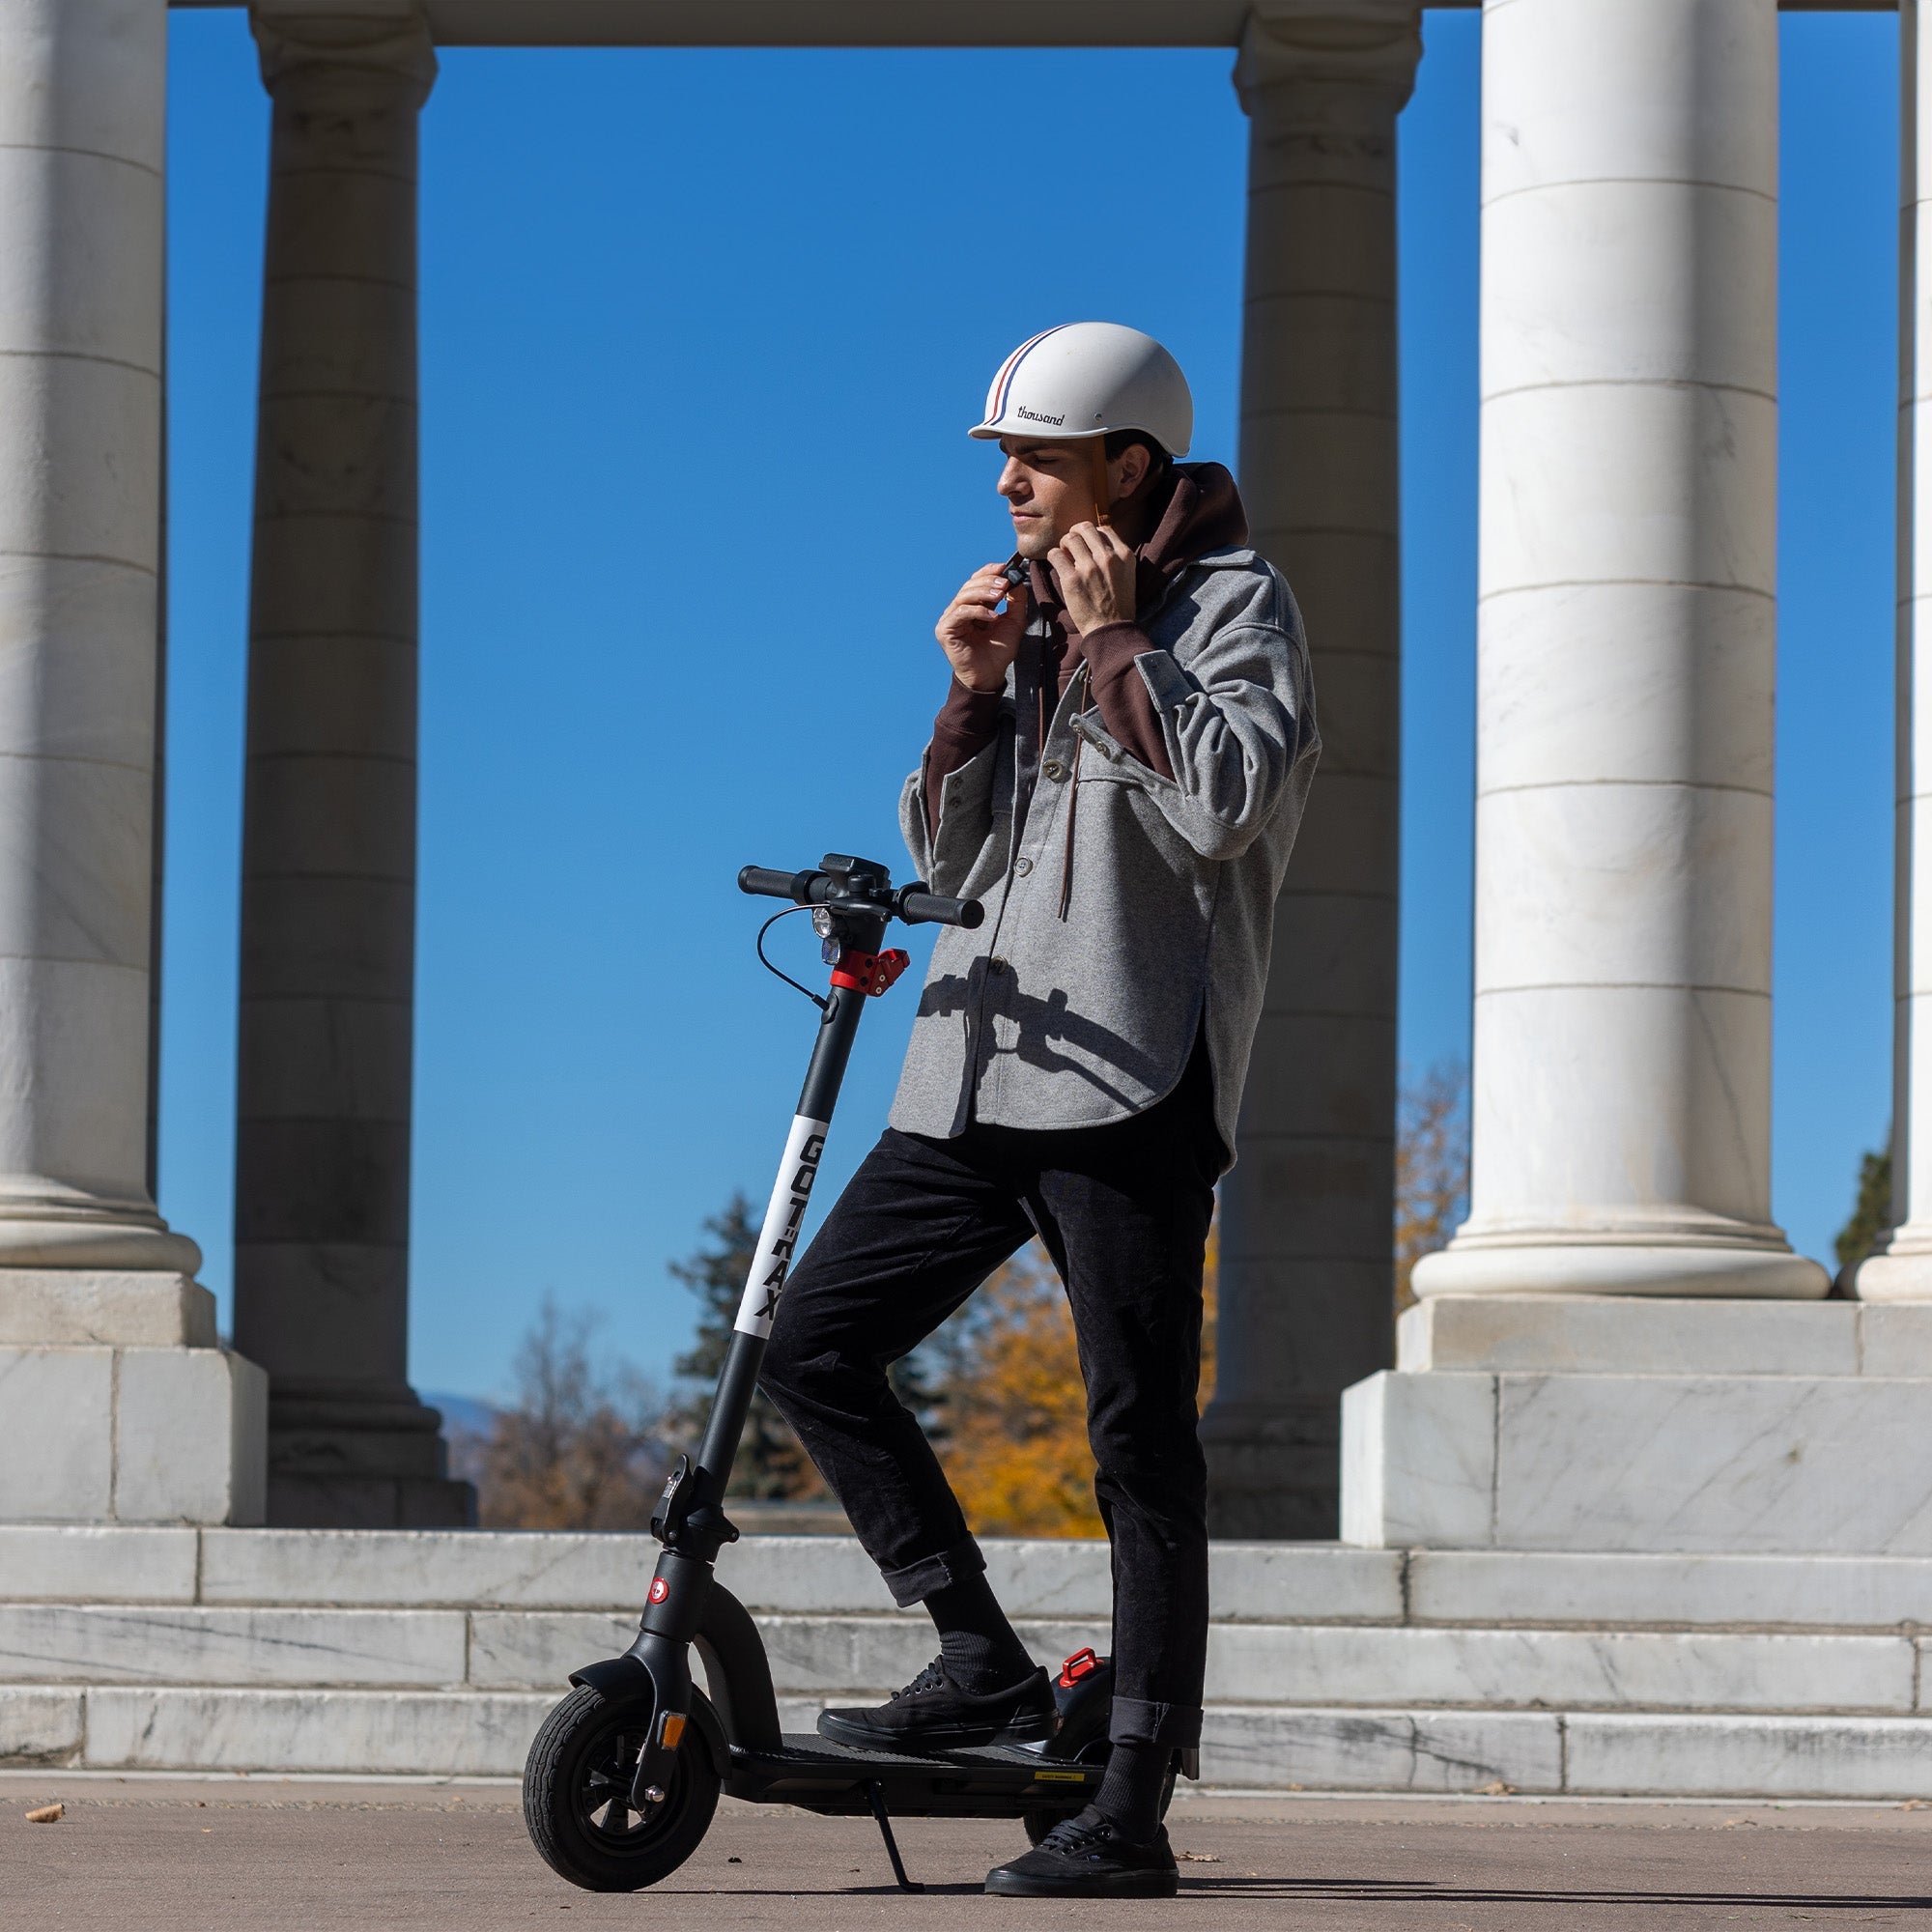 G4 Electric Scooter for Adults - GOTRAX